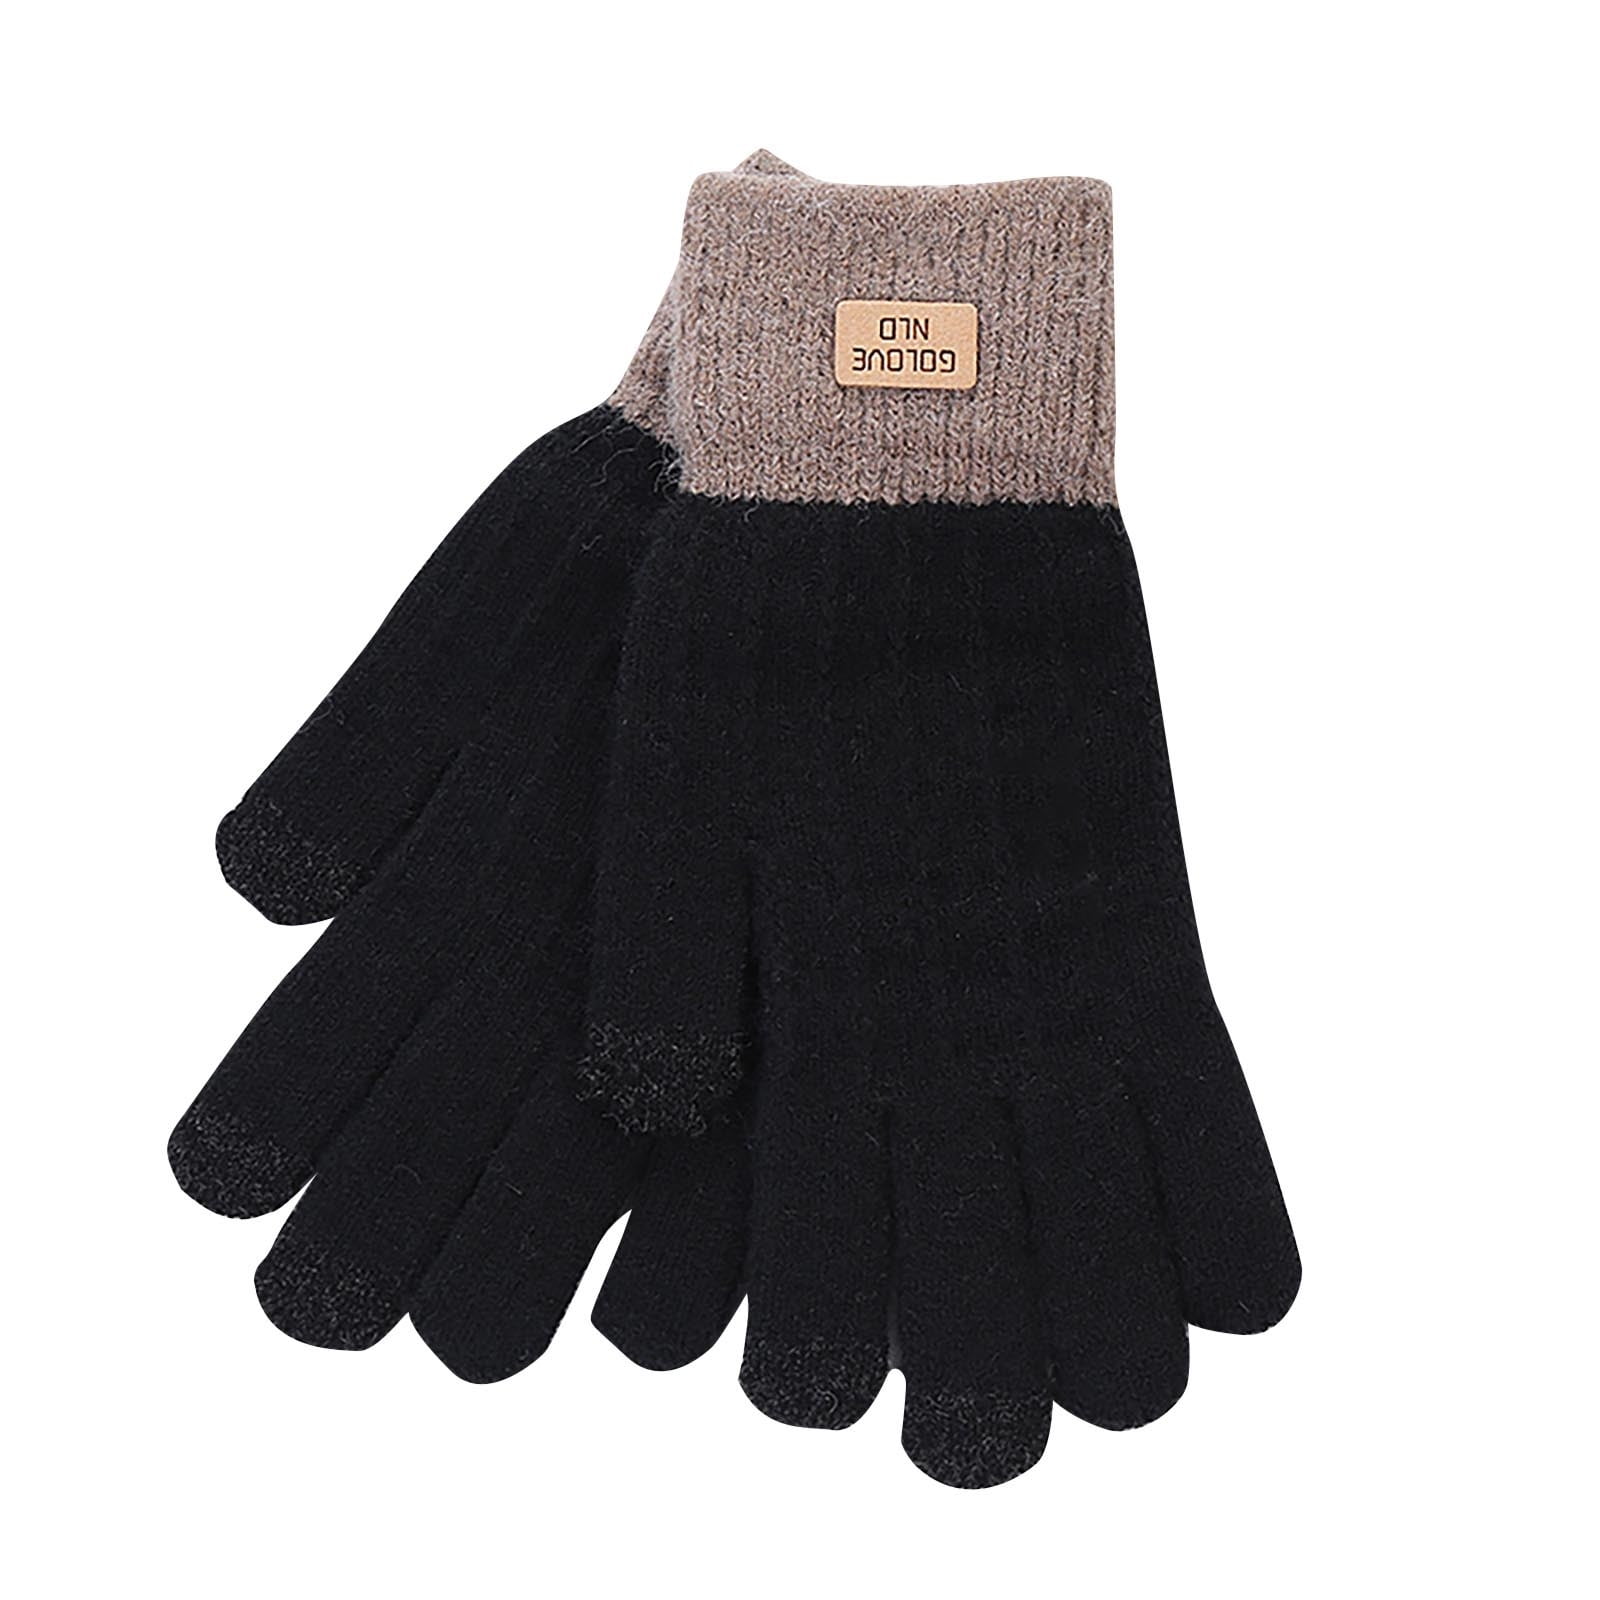 Kinco 5299-L Alyeska Ragg Wool Full Finger Glove with Thermal Lining Large 